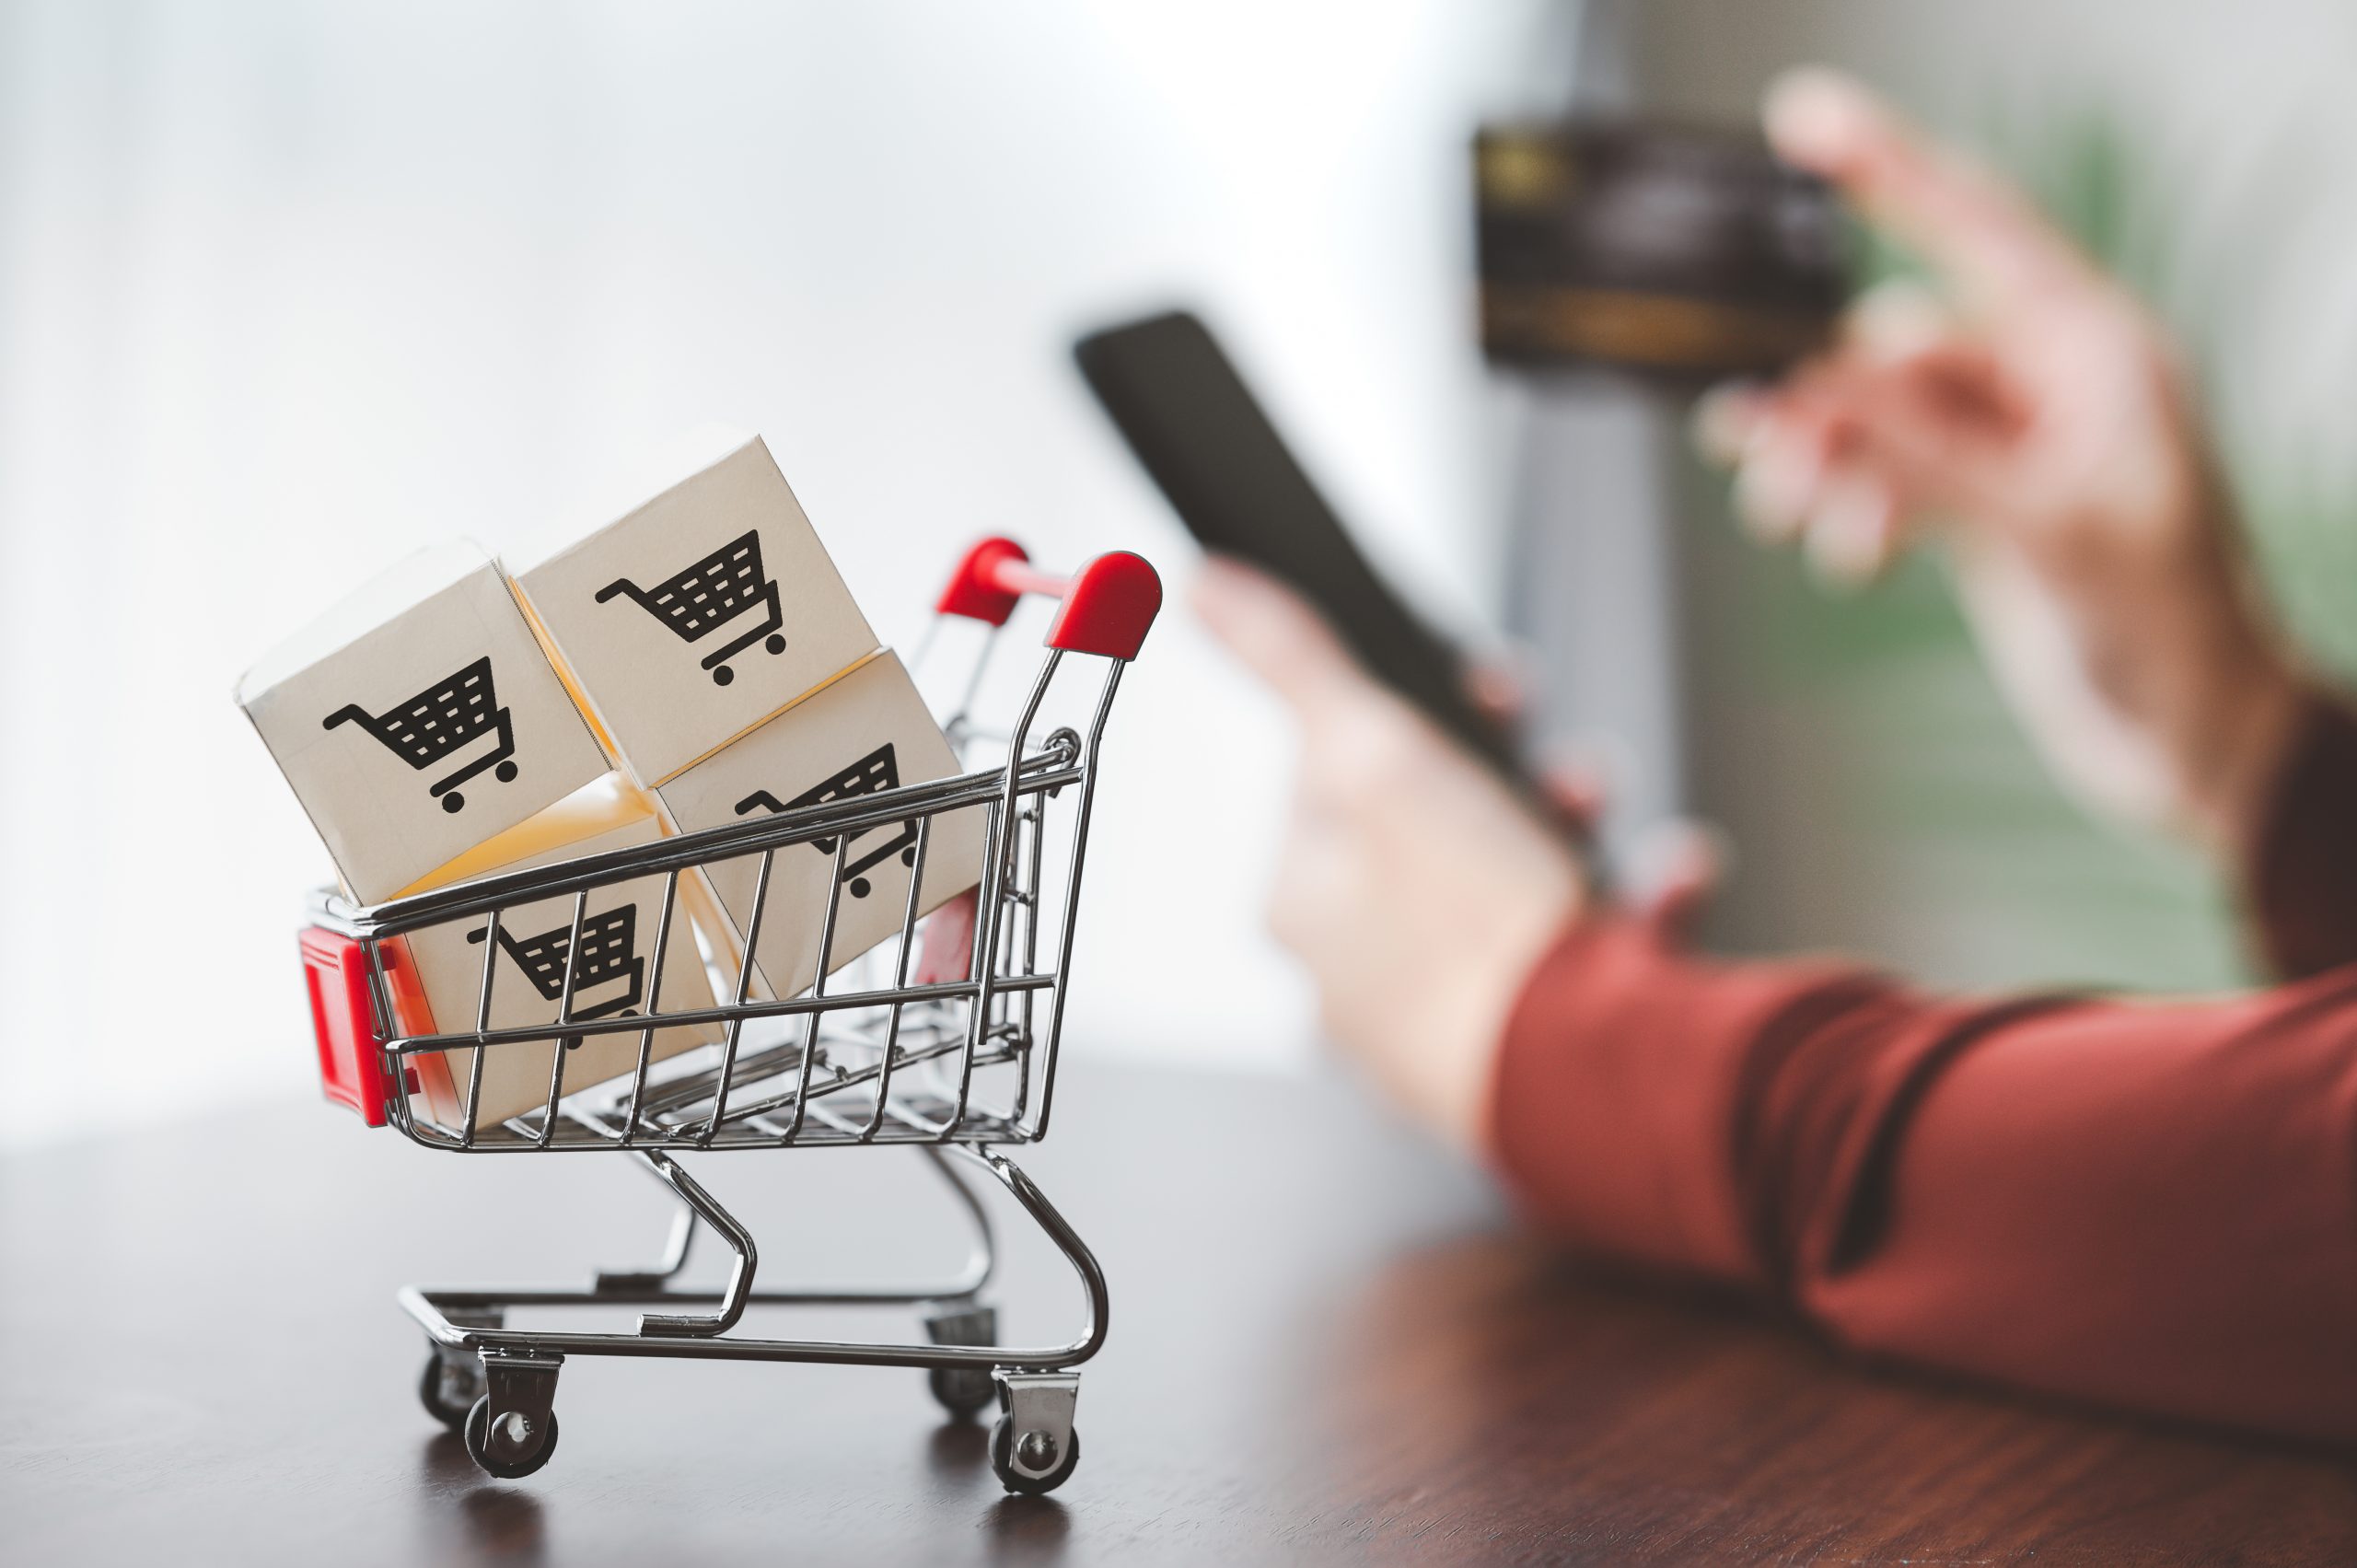 Paper cartons with shopping cart logo in a trolley for delivery with hand holding smartphone and credit card in bacground for online shopping